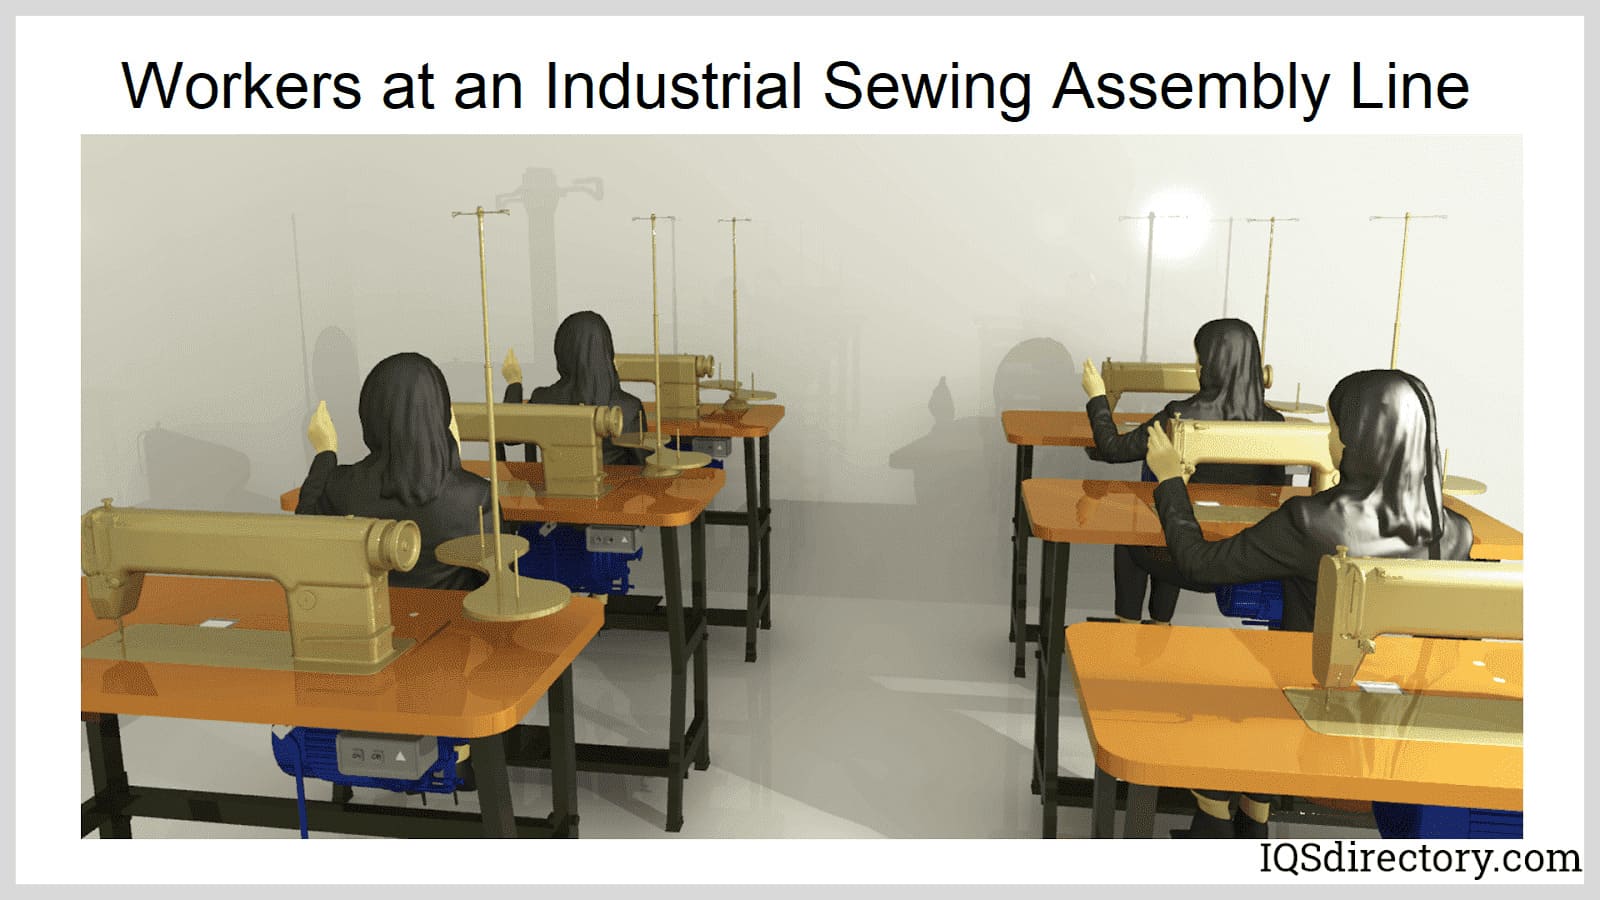 Workers at an Industrial Sewing Assembly Line